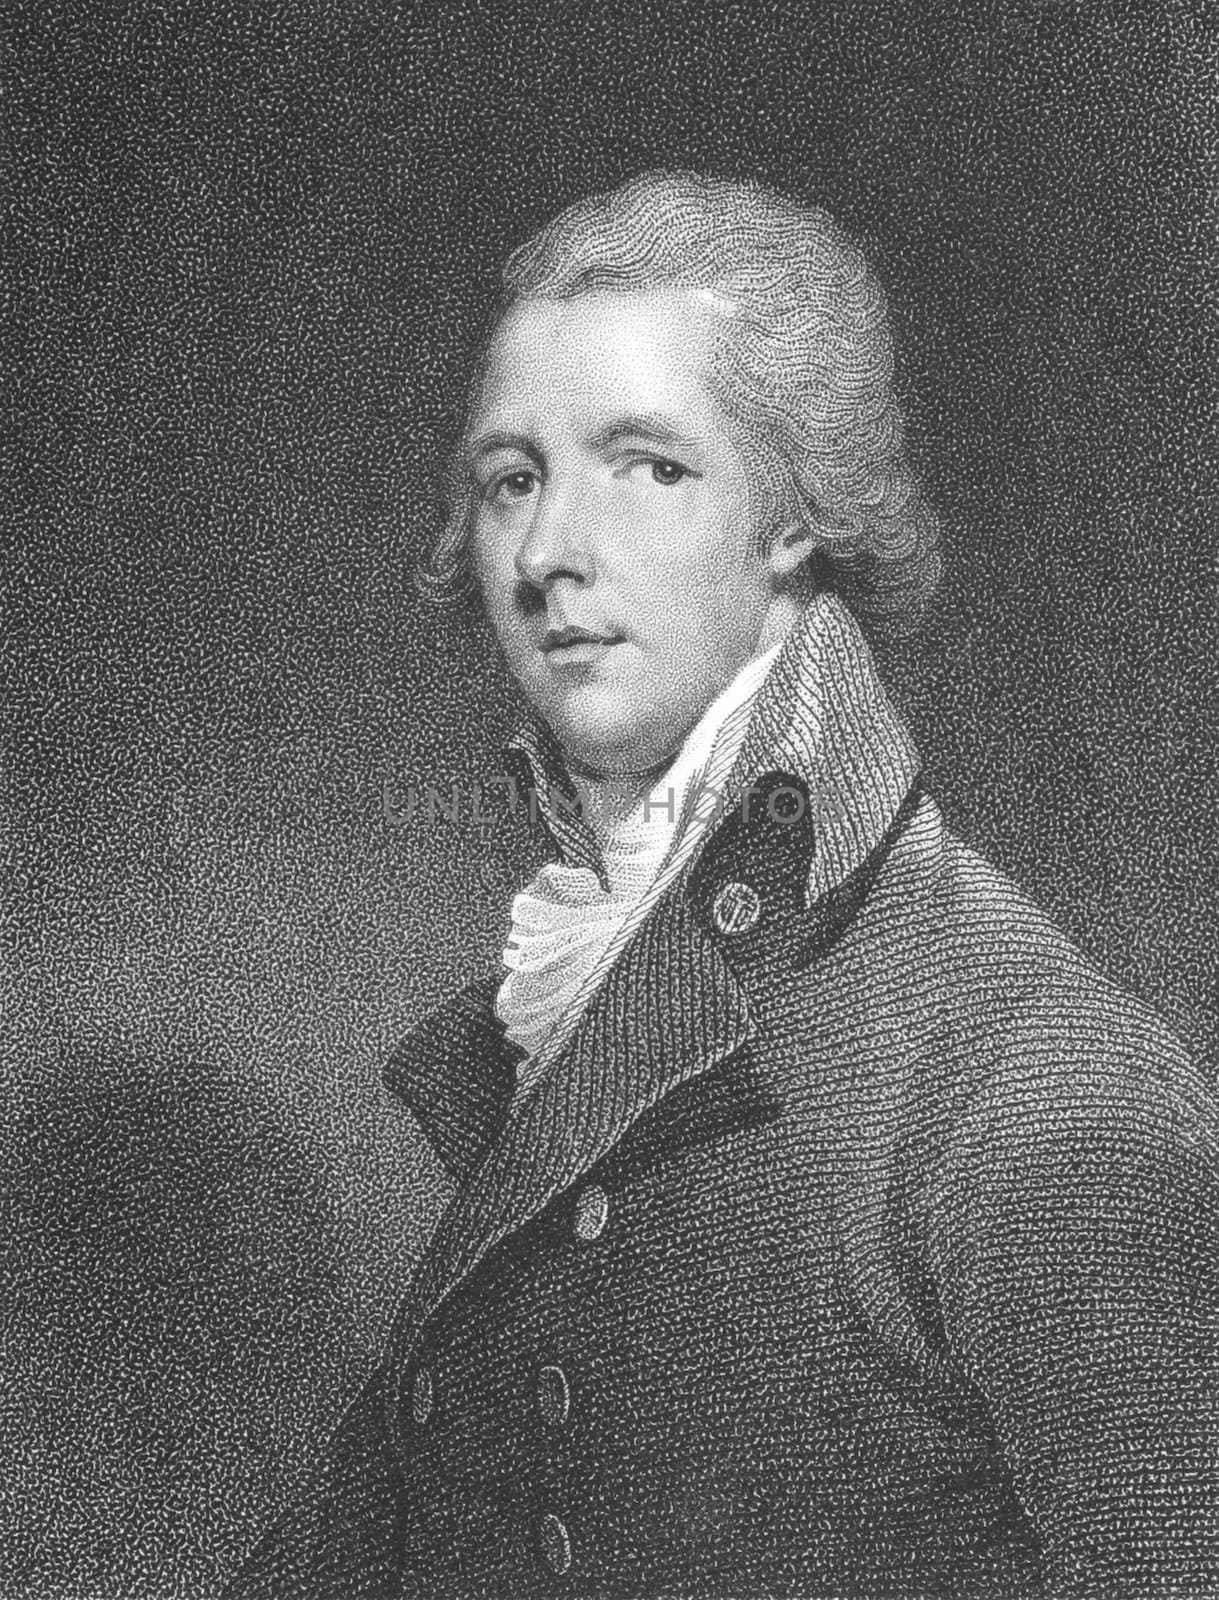 William Pitt, the Younger by Georgios